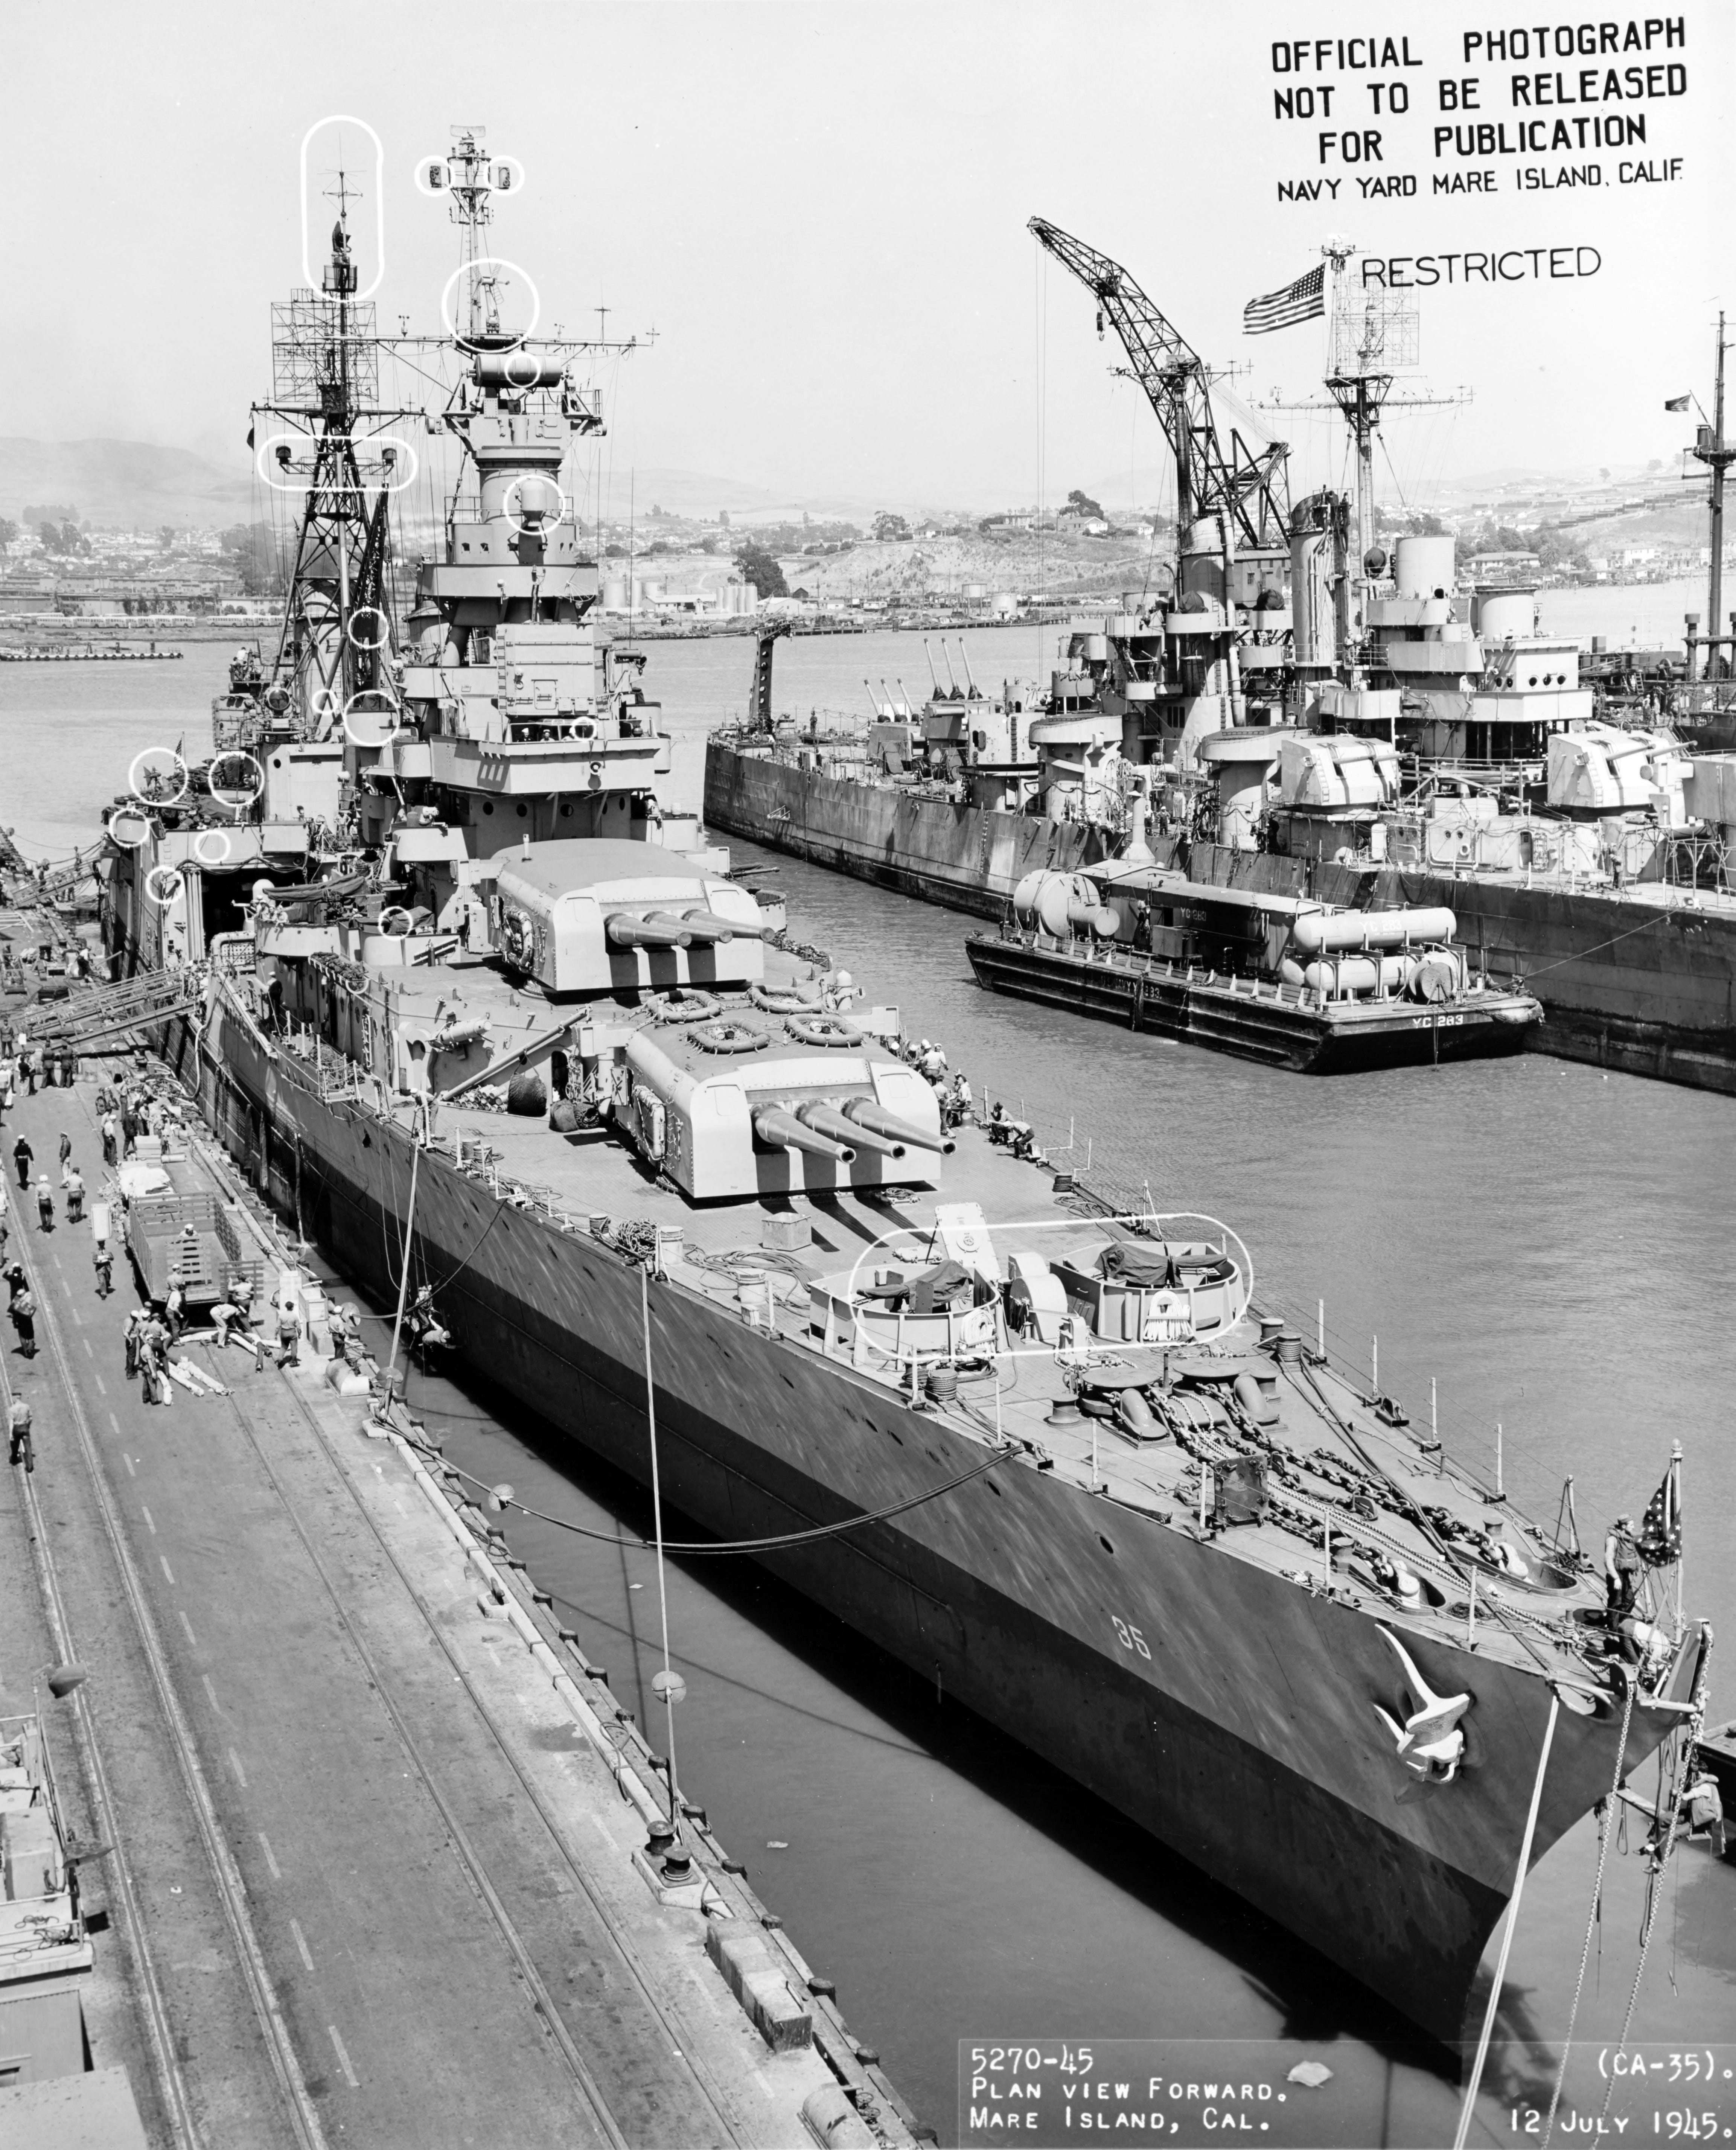 Microsoft co-founder Paul Allen finds lost WWII ship USS Indianapolis